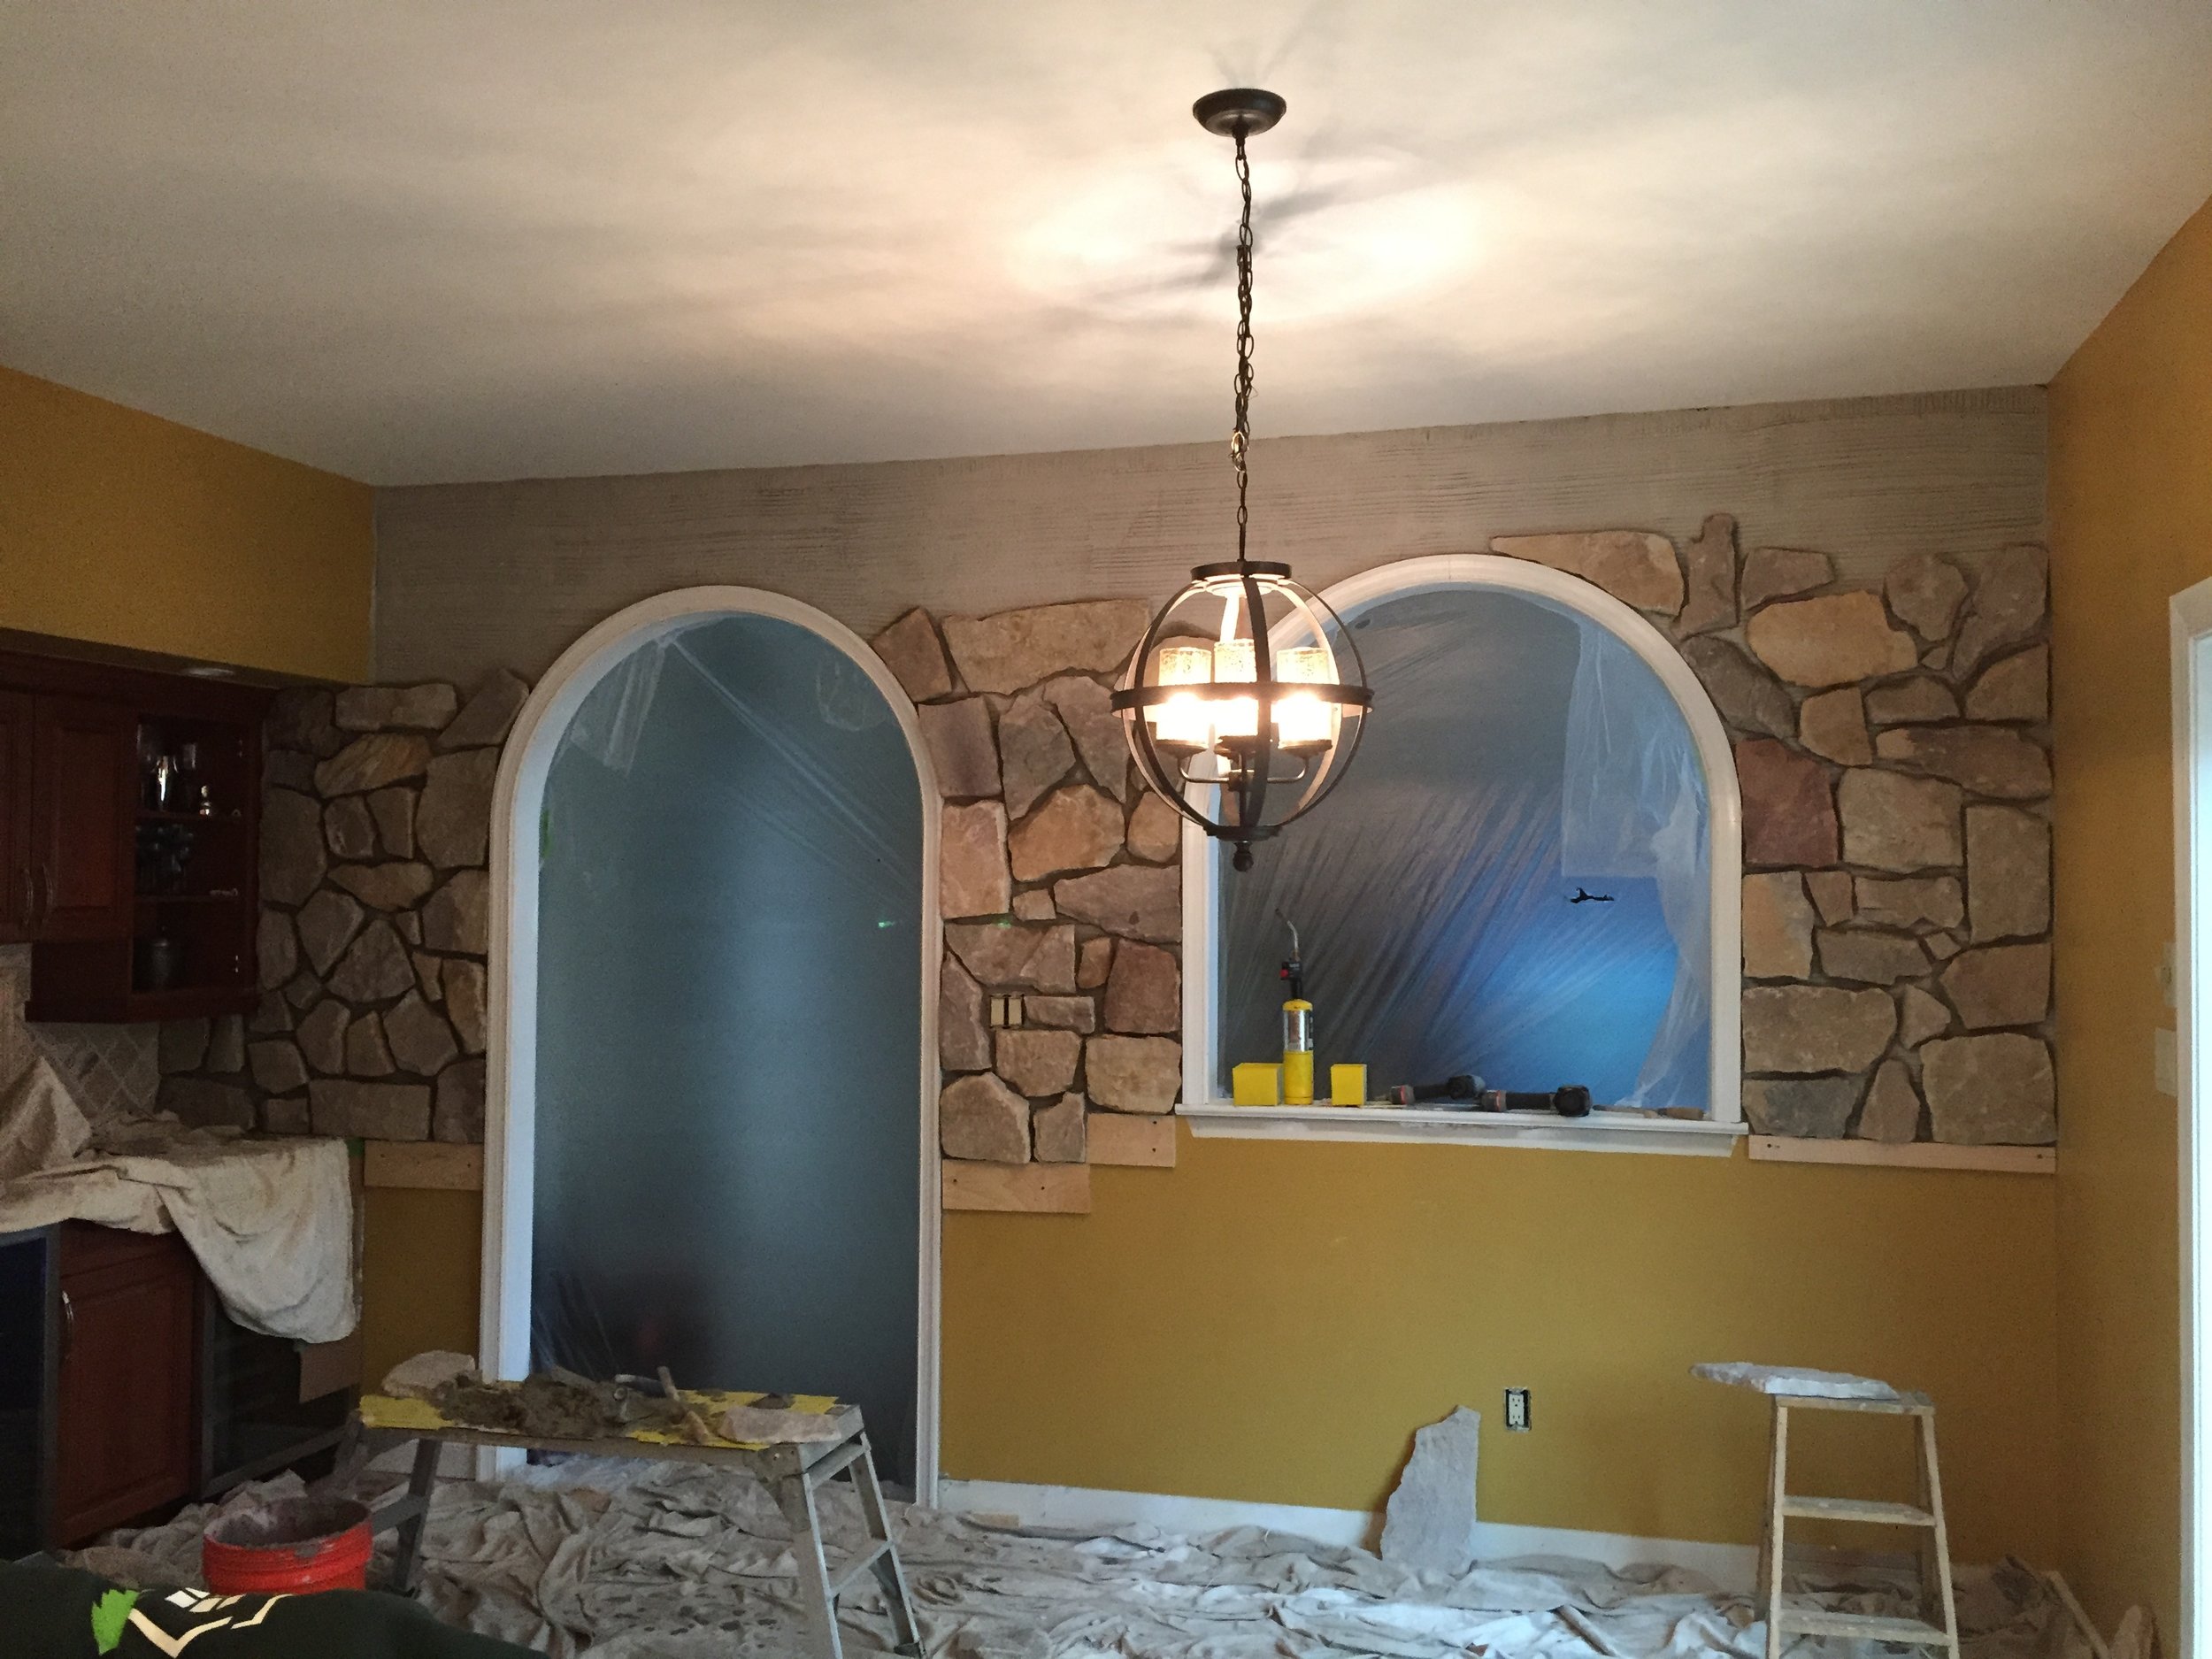  We used a 2" veneer stone to match some existing stone accents in the home.&nbsp; 